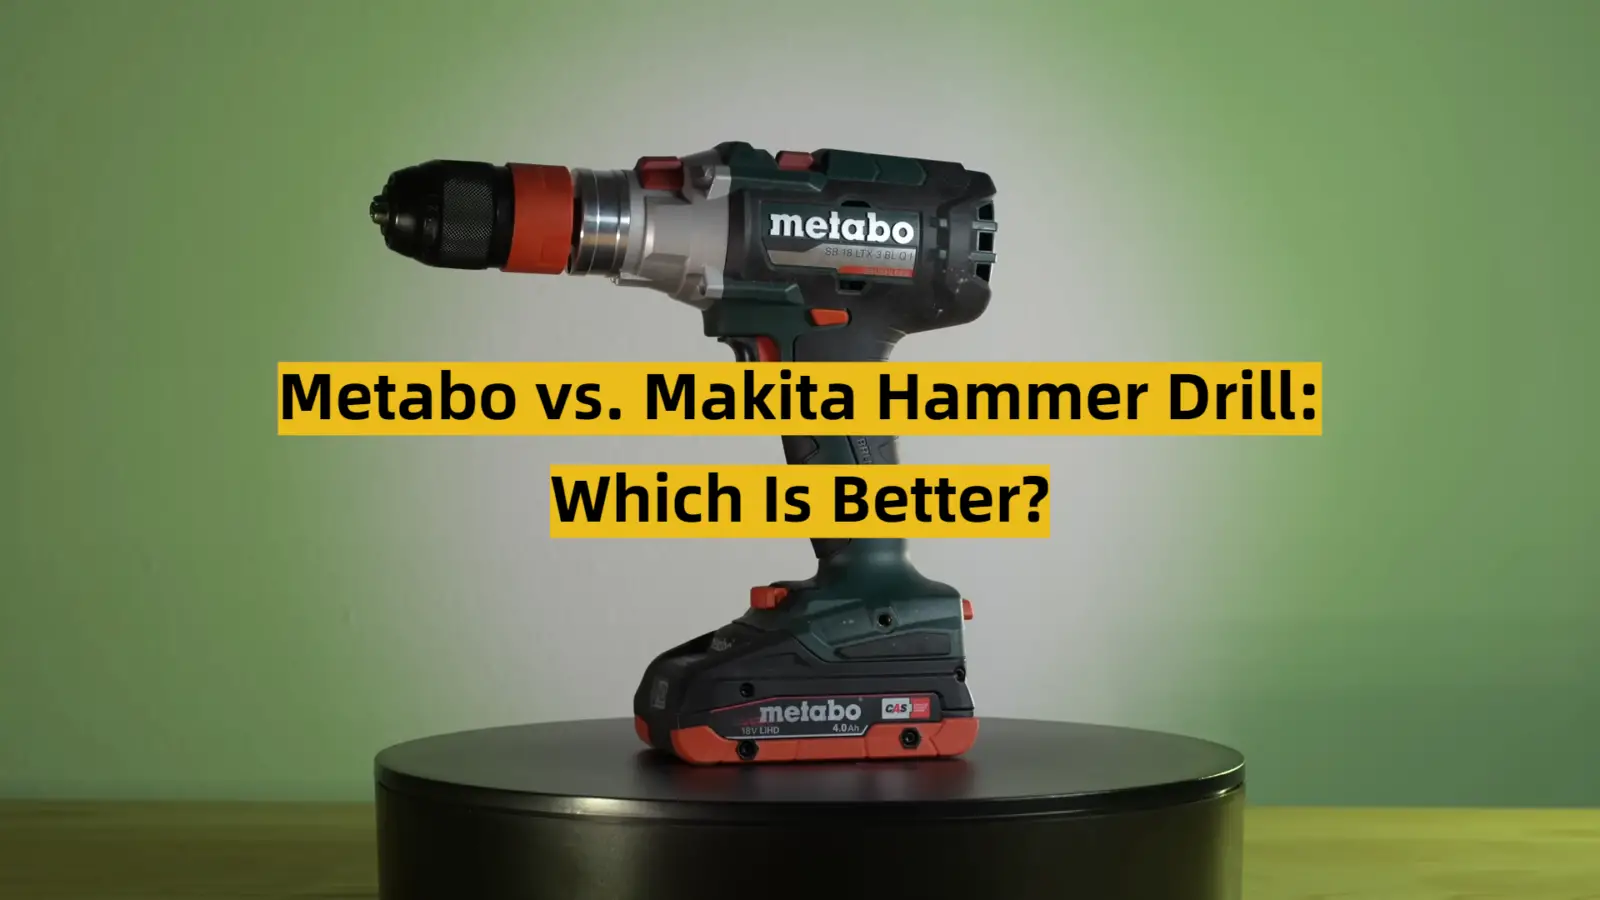 Metabo vs. Makita Hammer Drill: Which Is Better?